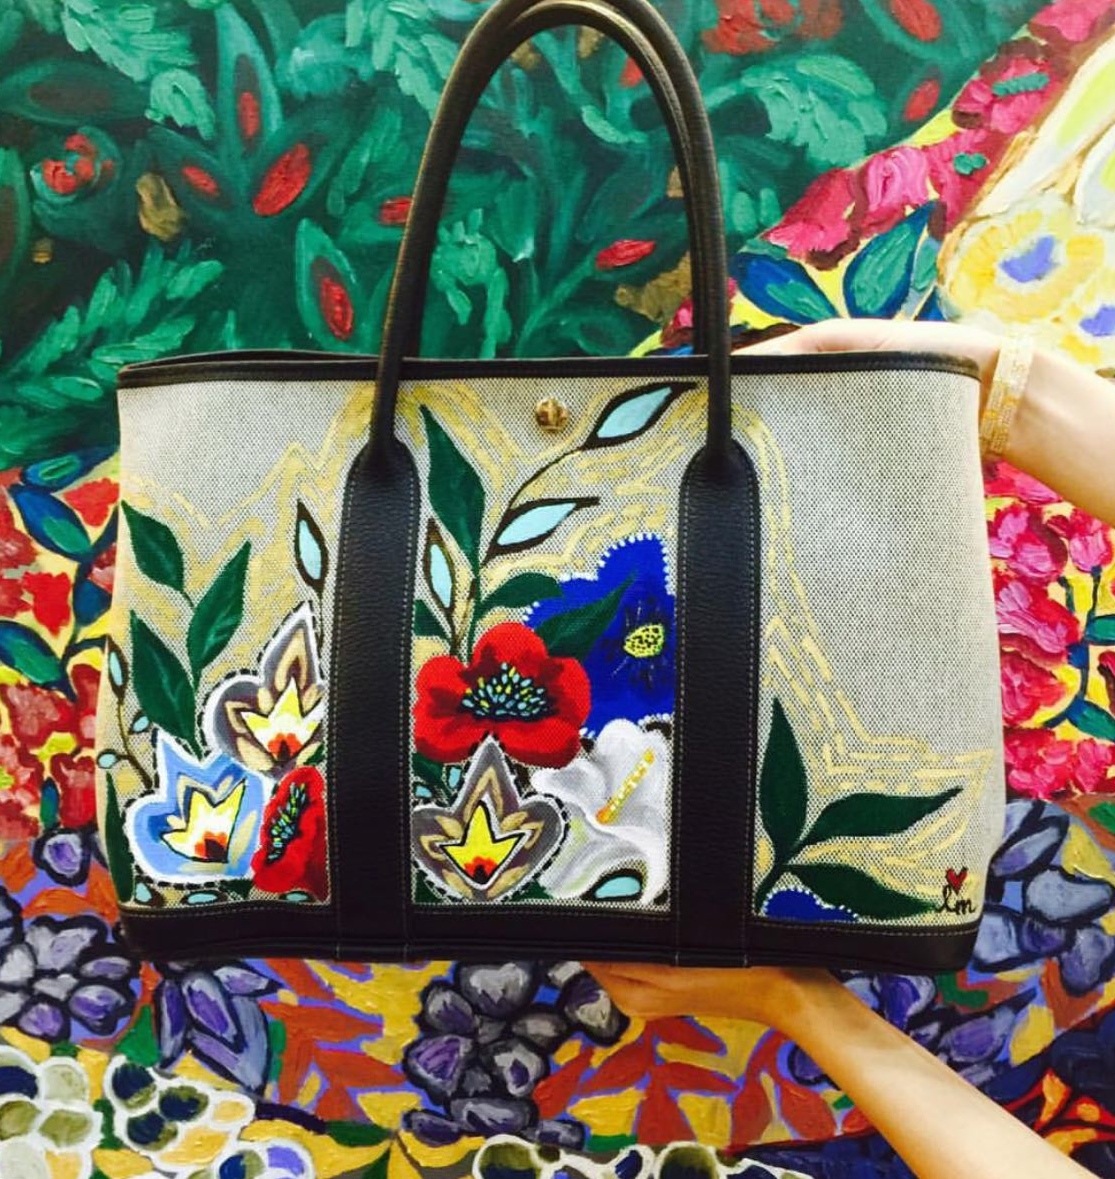 LOOK: We Are in Love With Jinkee Pacquiao's Hand-Painted Bag by Heart  Evangelista - When In Manila